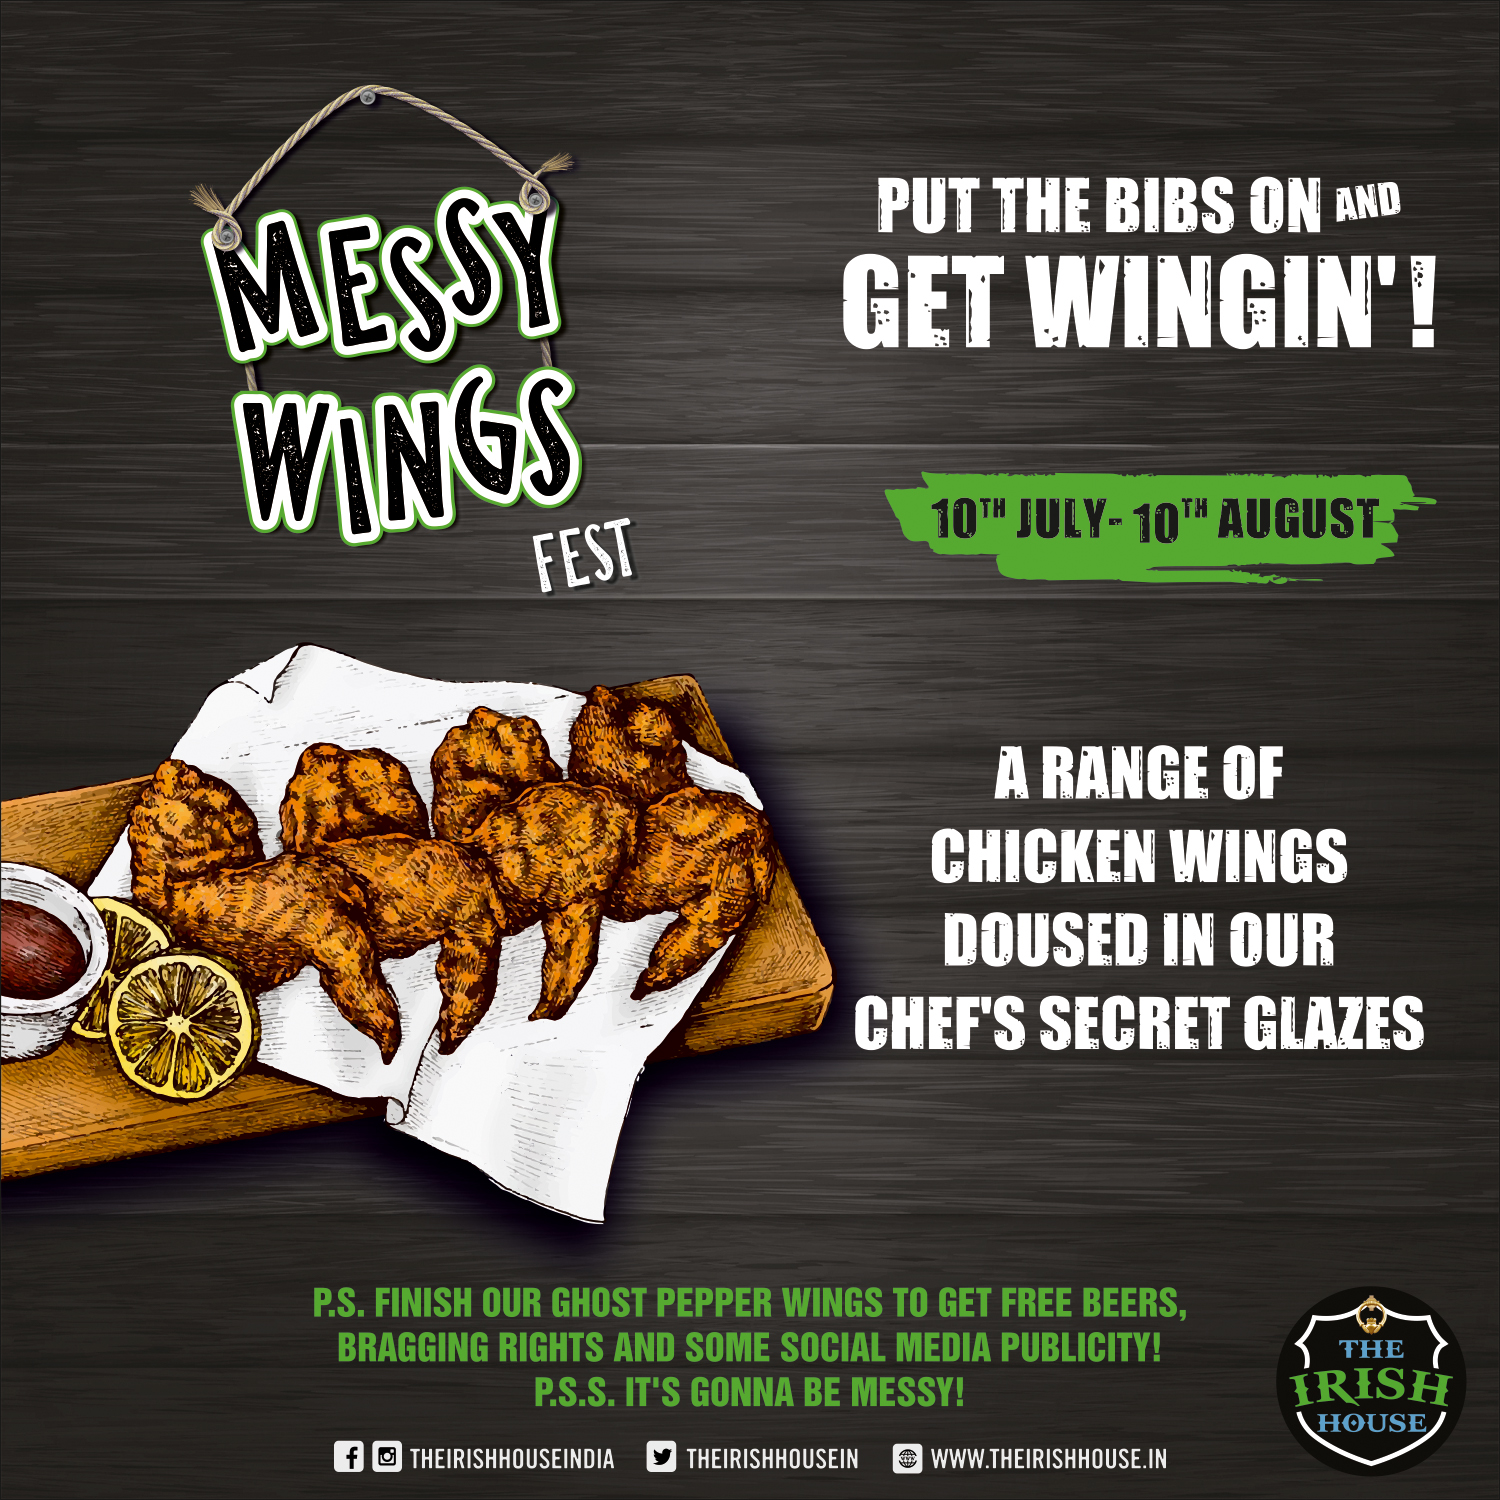 The Irish House Messy Wings Fest Is Here!